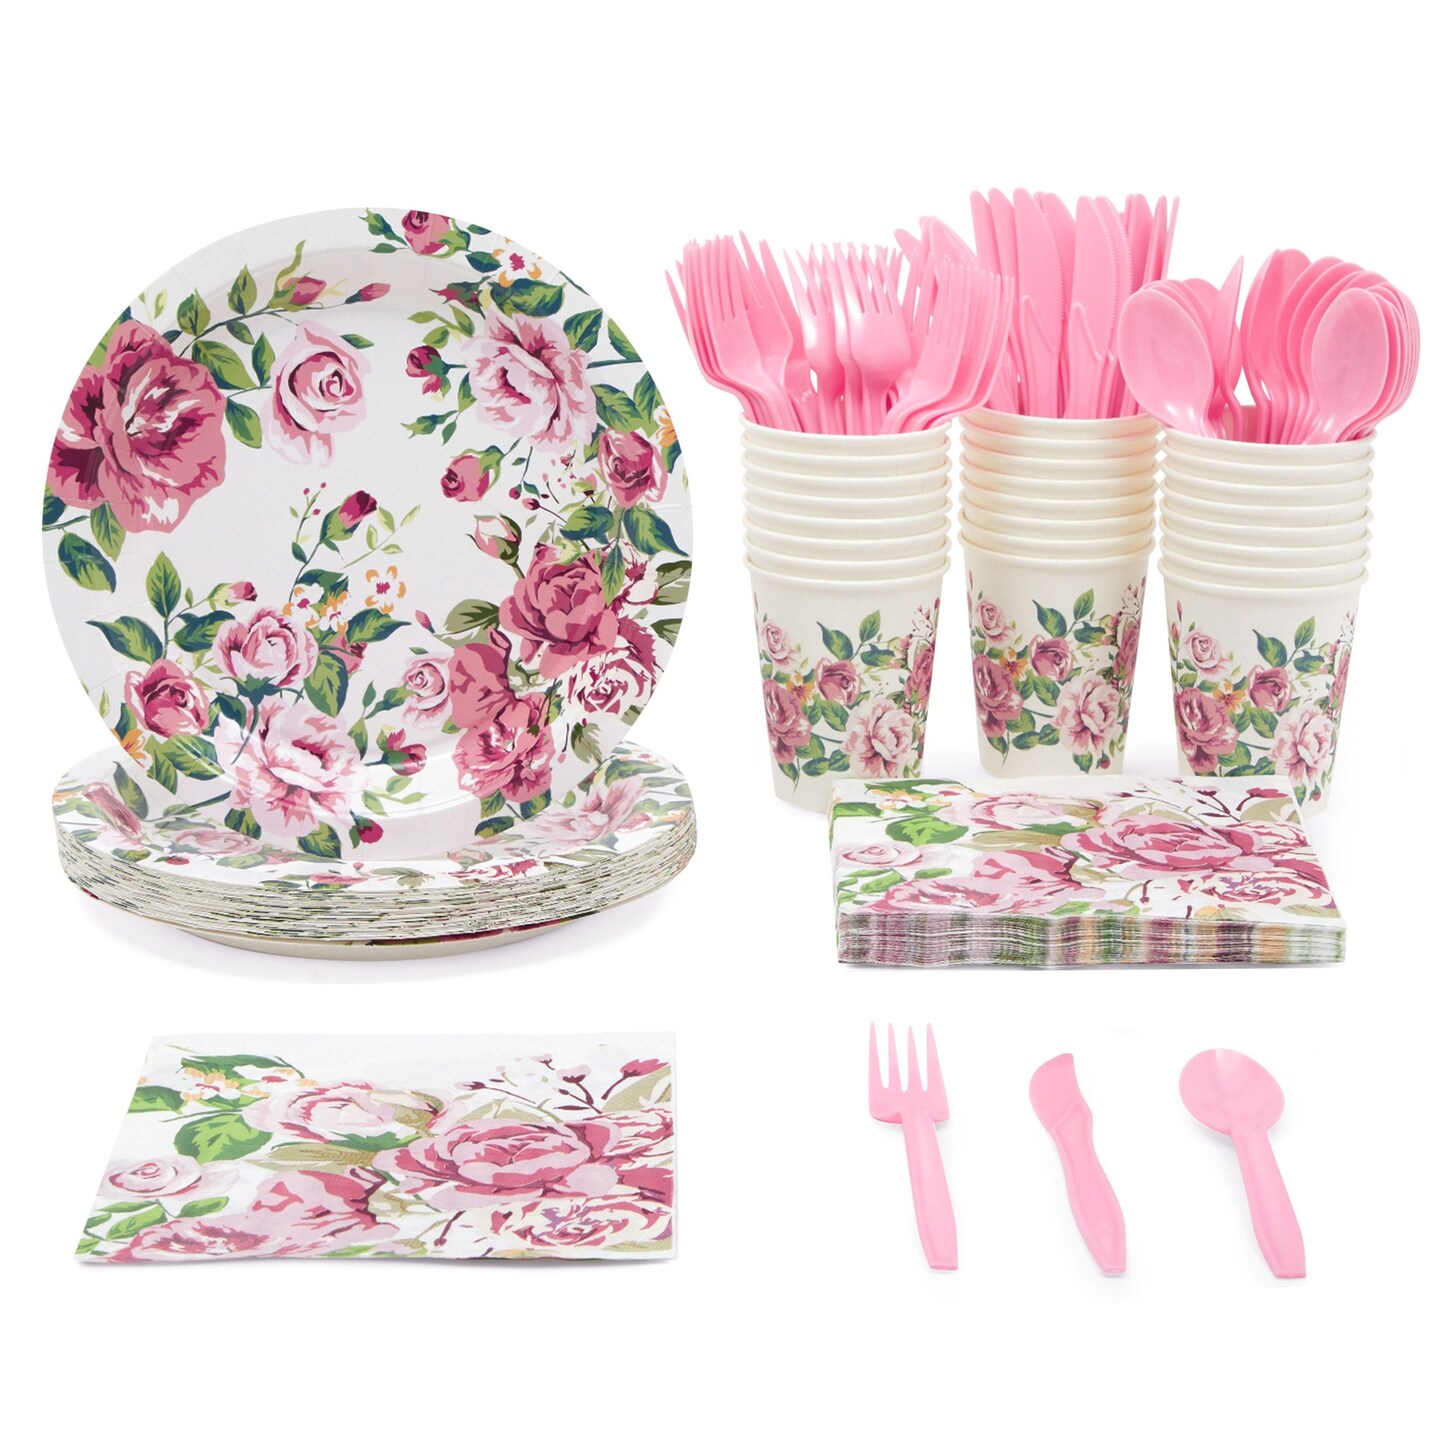 BLUE PANDA 144 Piece Vintage Style Tea Party Supplies, Includes Disposable Floral Paper Plates, Napkins, Cups, &#x26; Cutlery, For Baby Showers, Weddings &#x26; More, Serves 24